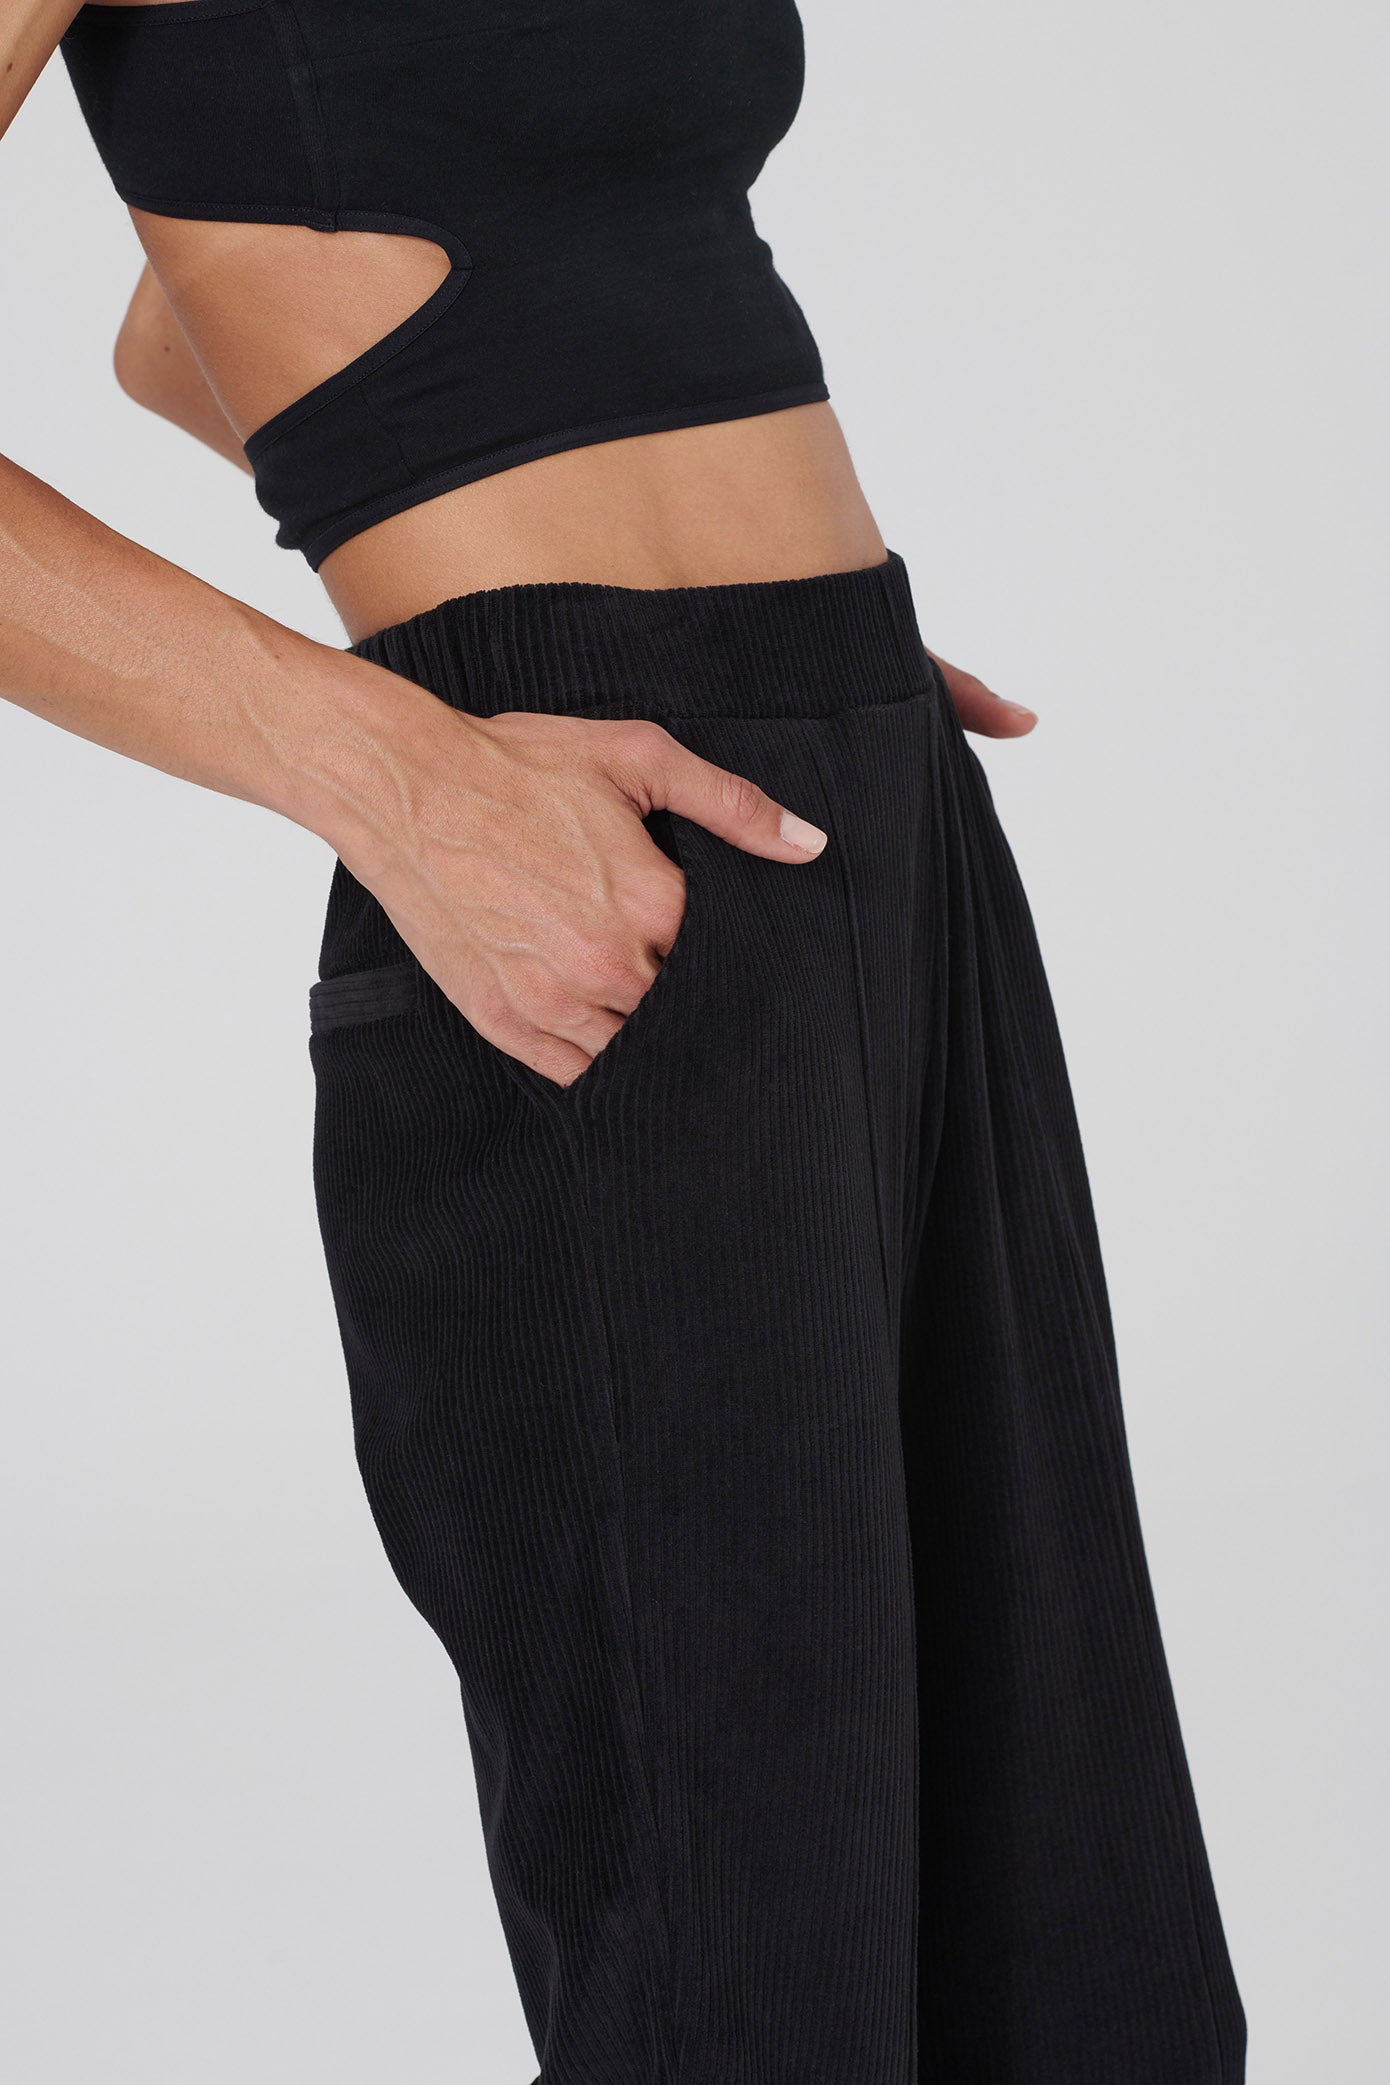 THILDA jogging pants in black by LOVJOI made of organic cotton (ST)